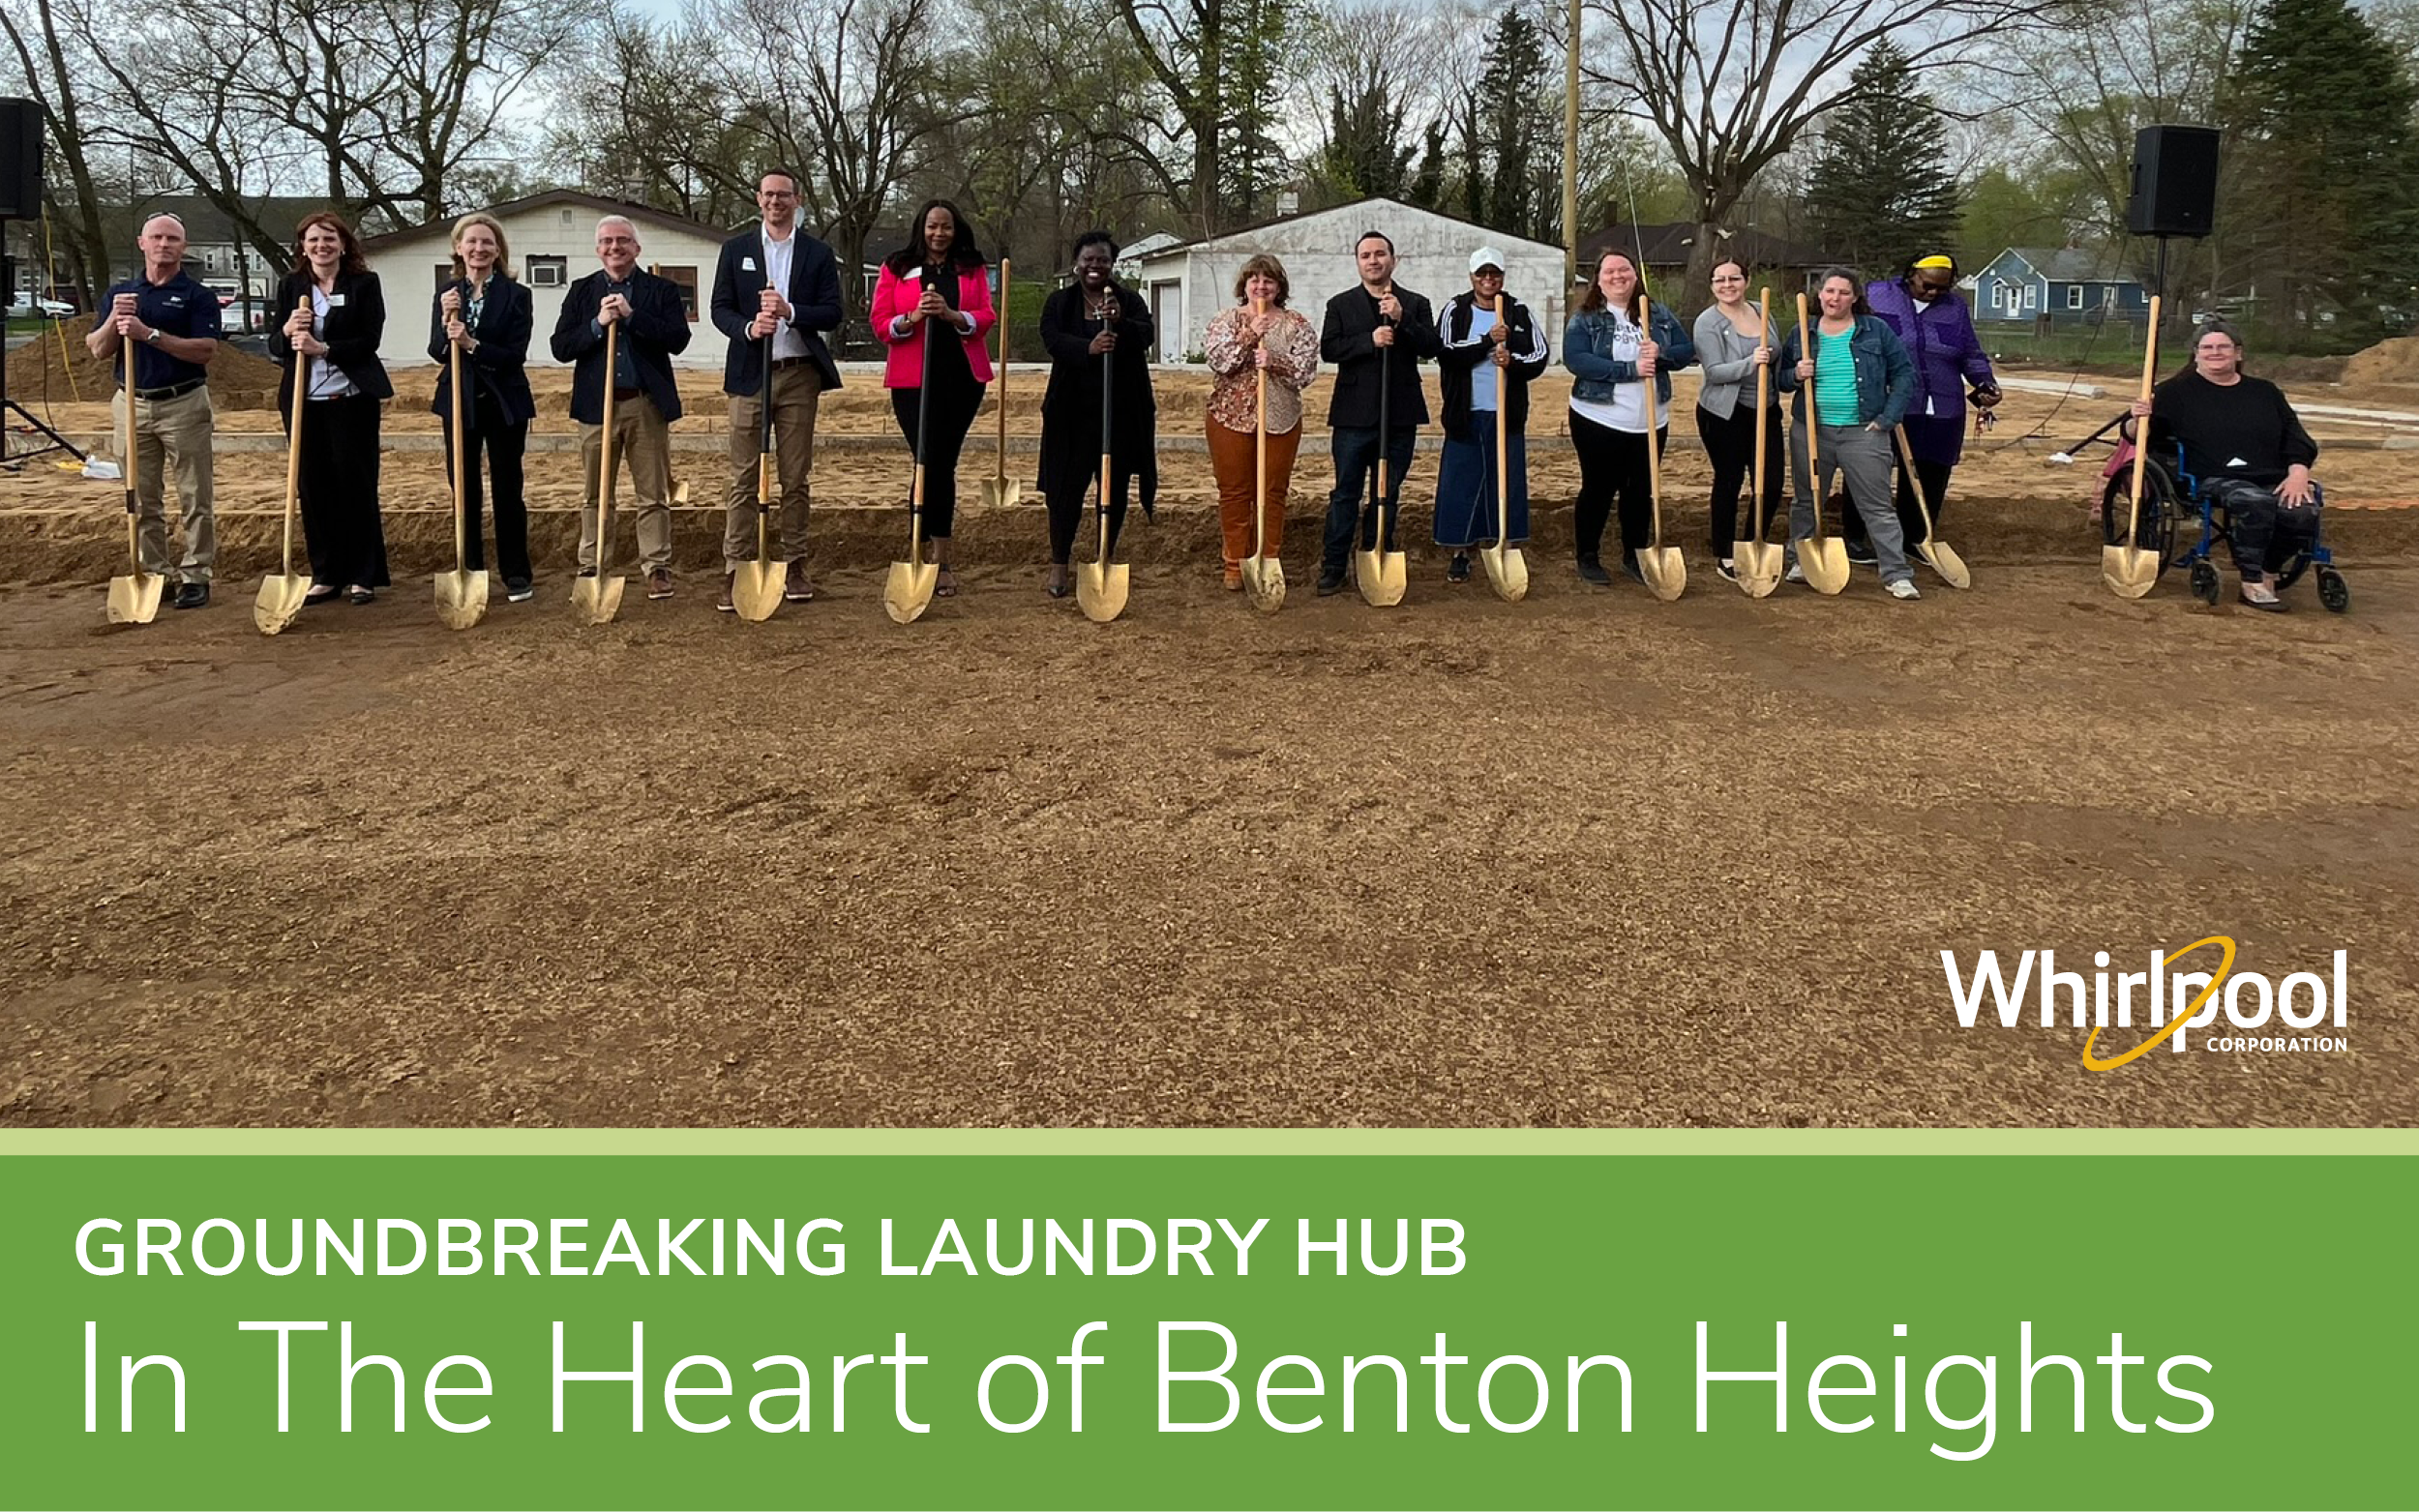 Groundbreaking held for New Heights Laundry Hub bringing essential services to Benton Heights 3